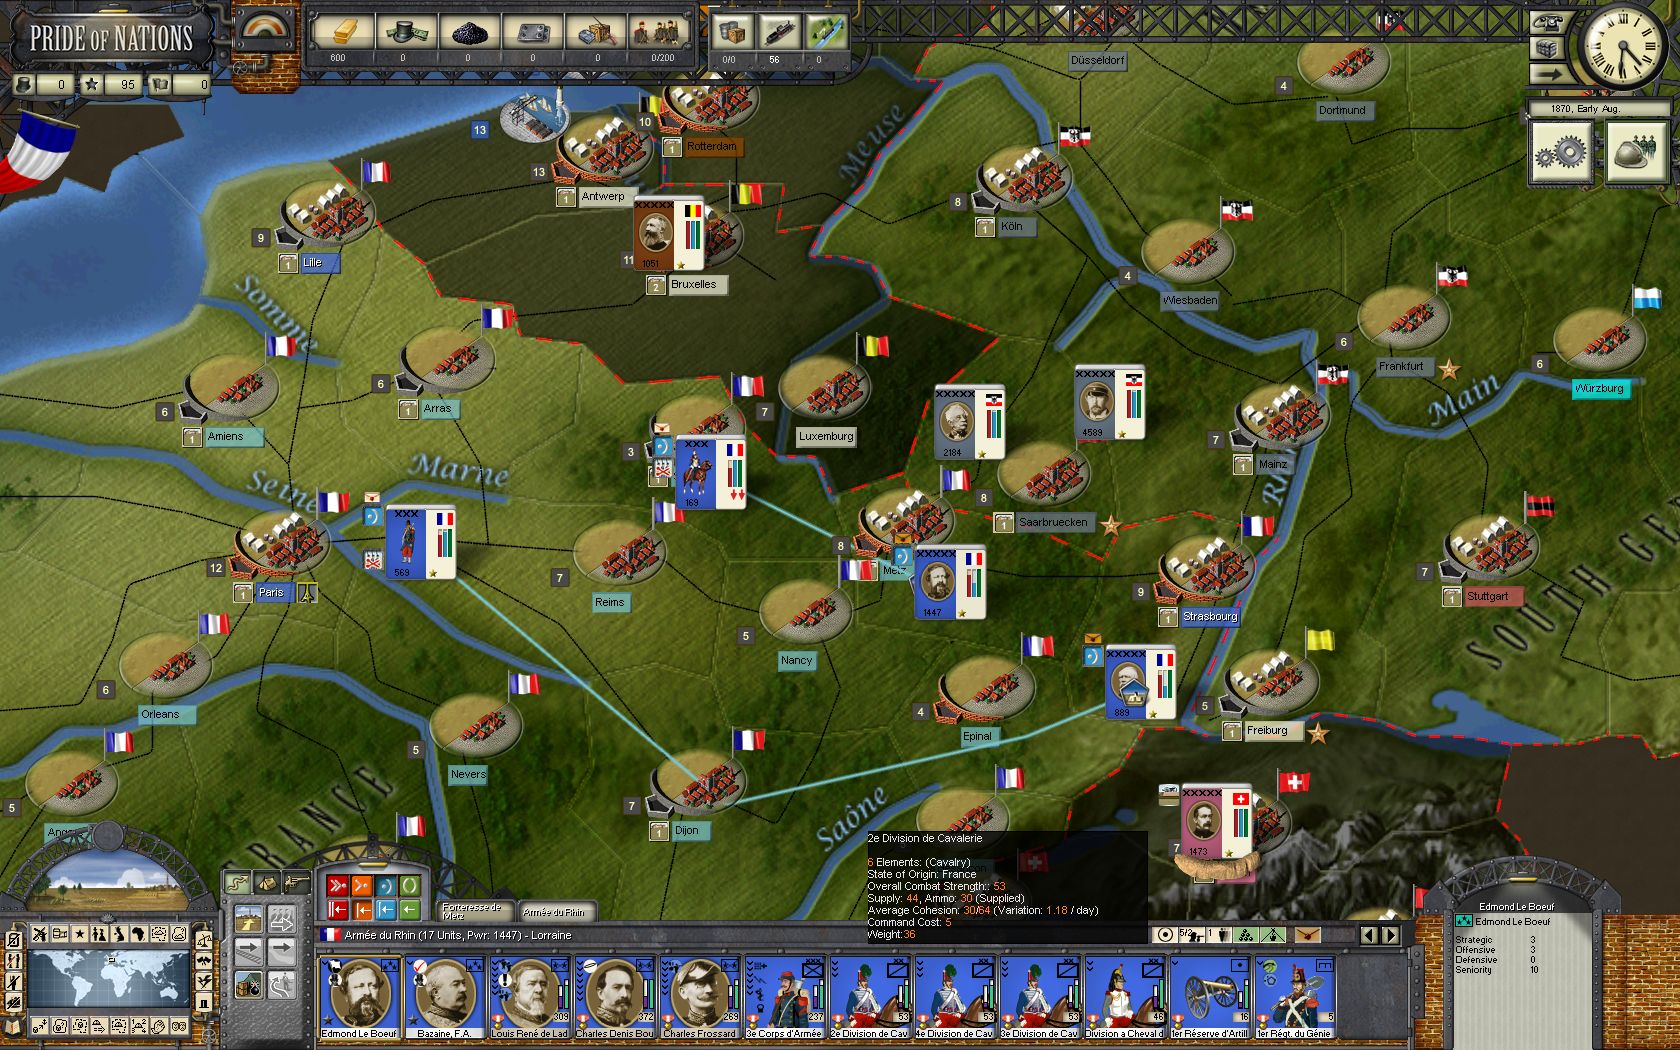 [$ 4.38] Pride of Nations - The Franco-Prussian War 1870 DLC Steam CD Key